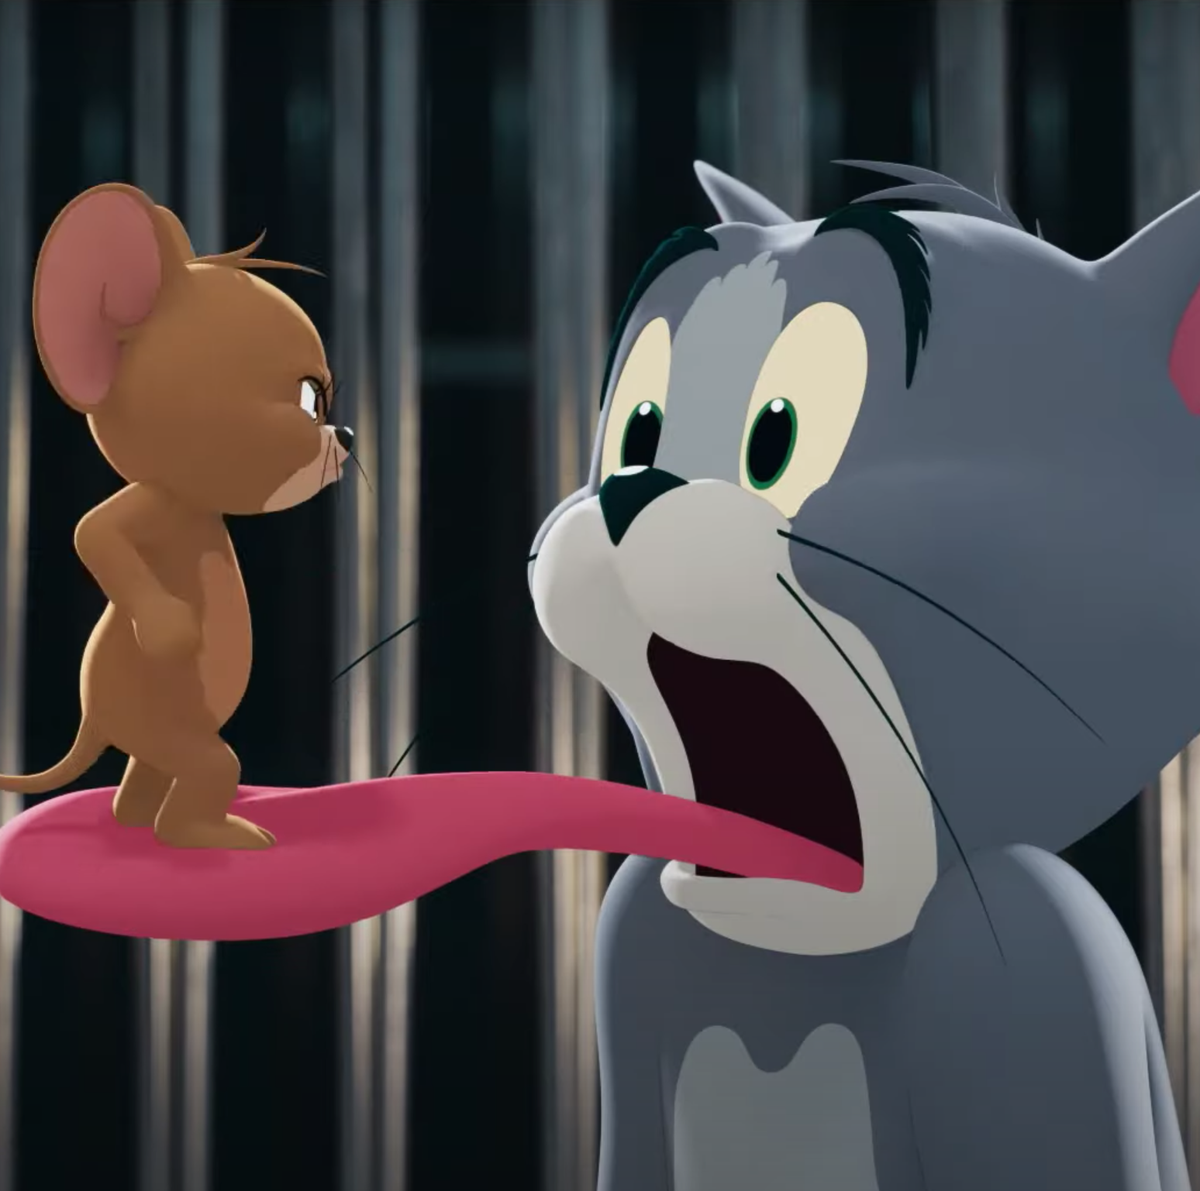 Tom & Jerry live-action movie gets brutal first reviews